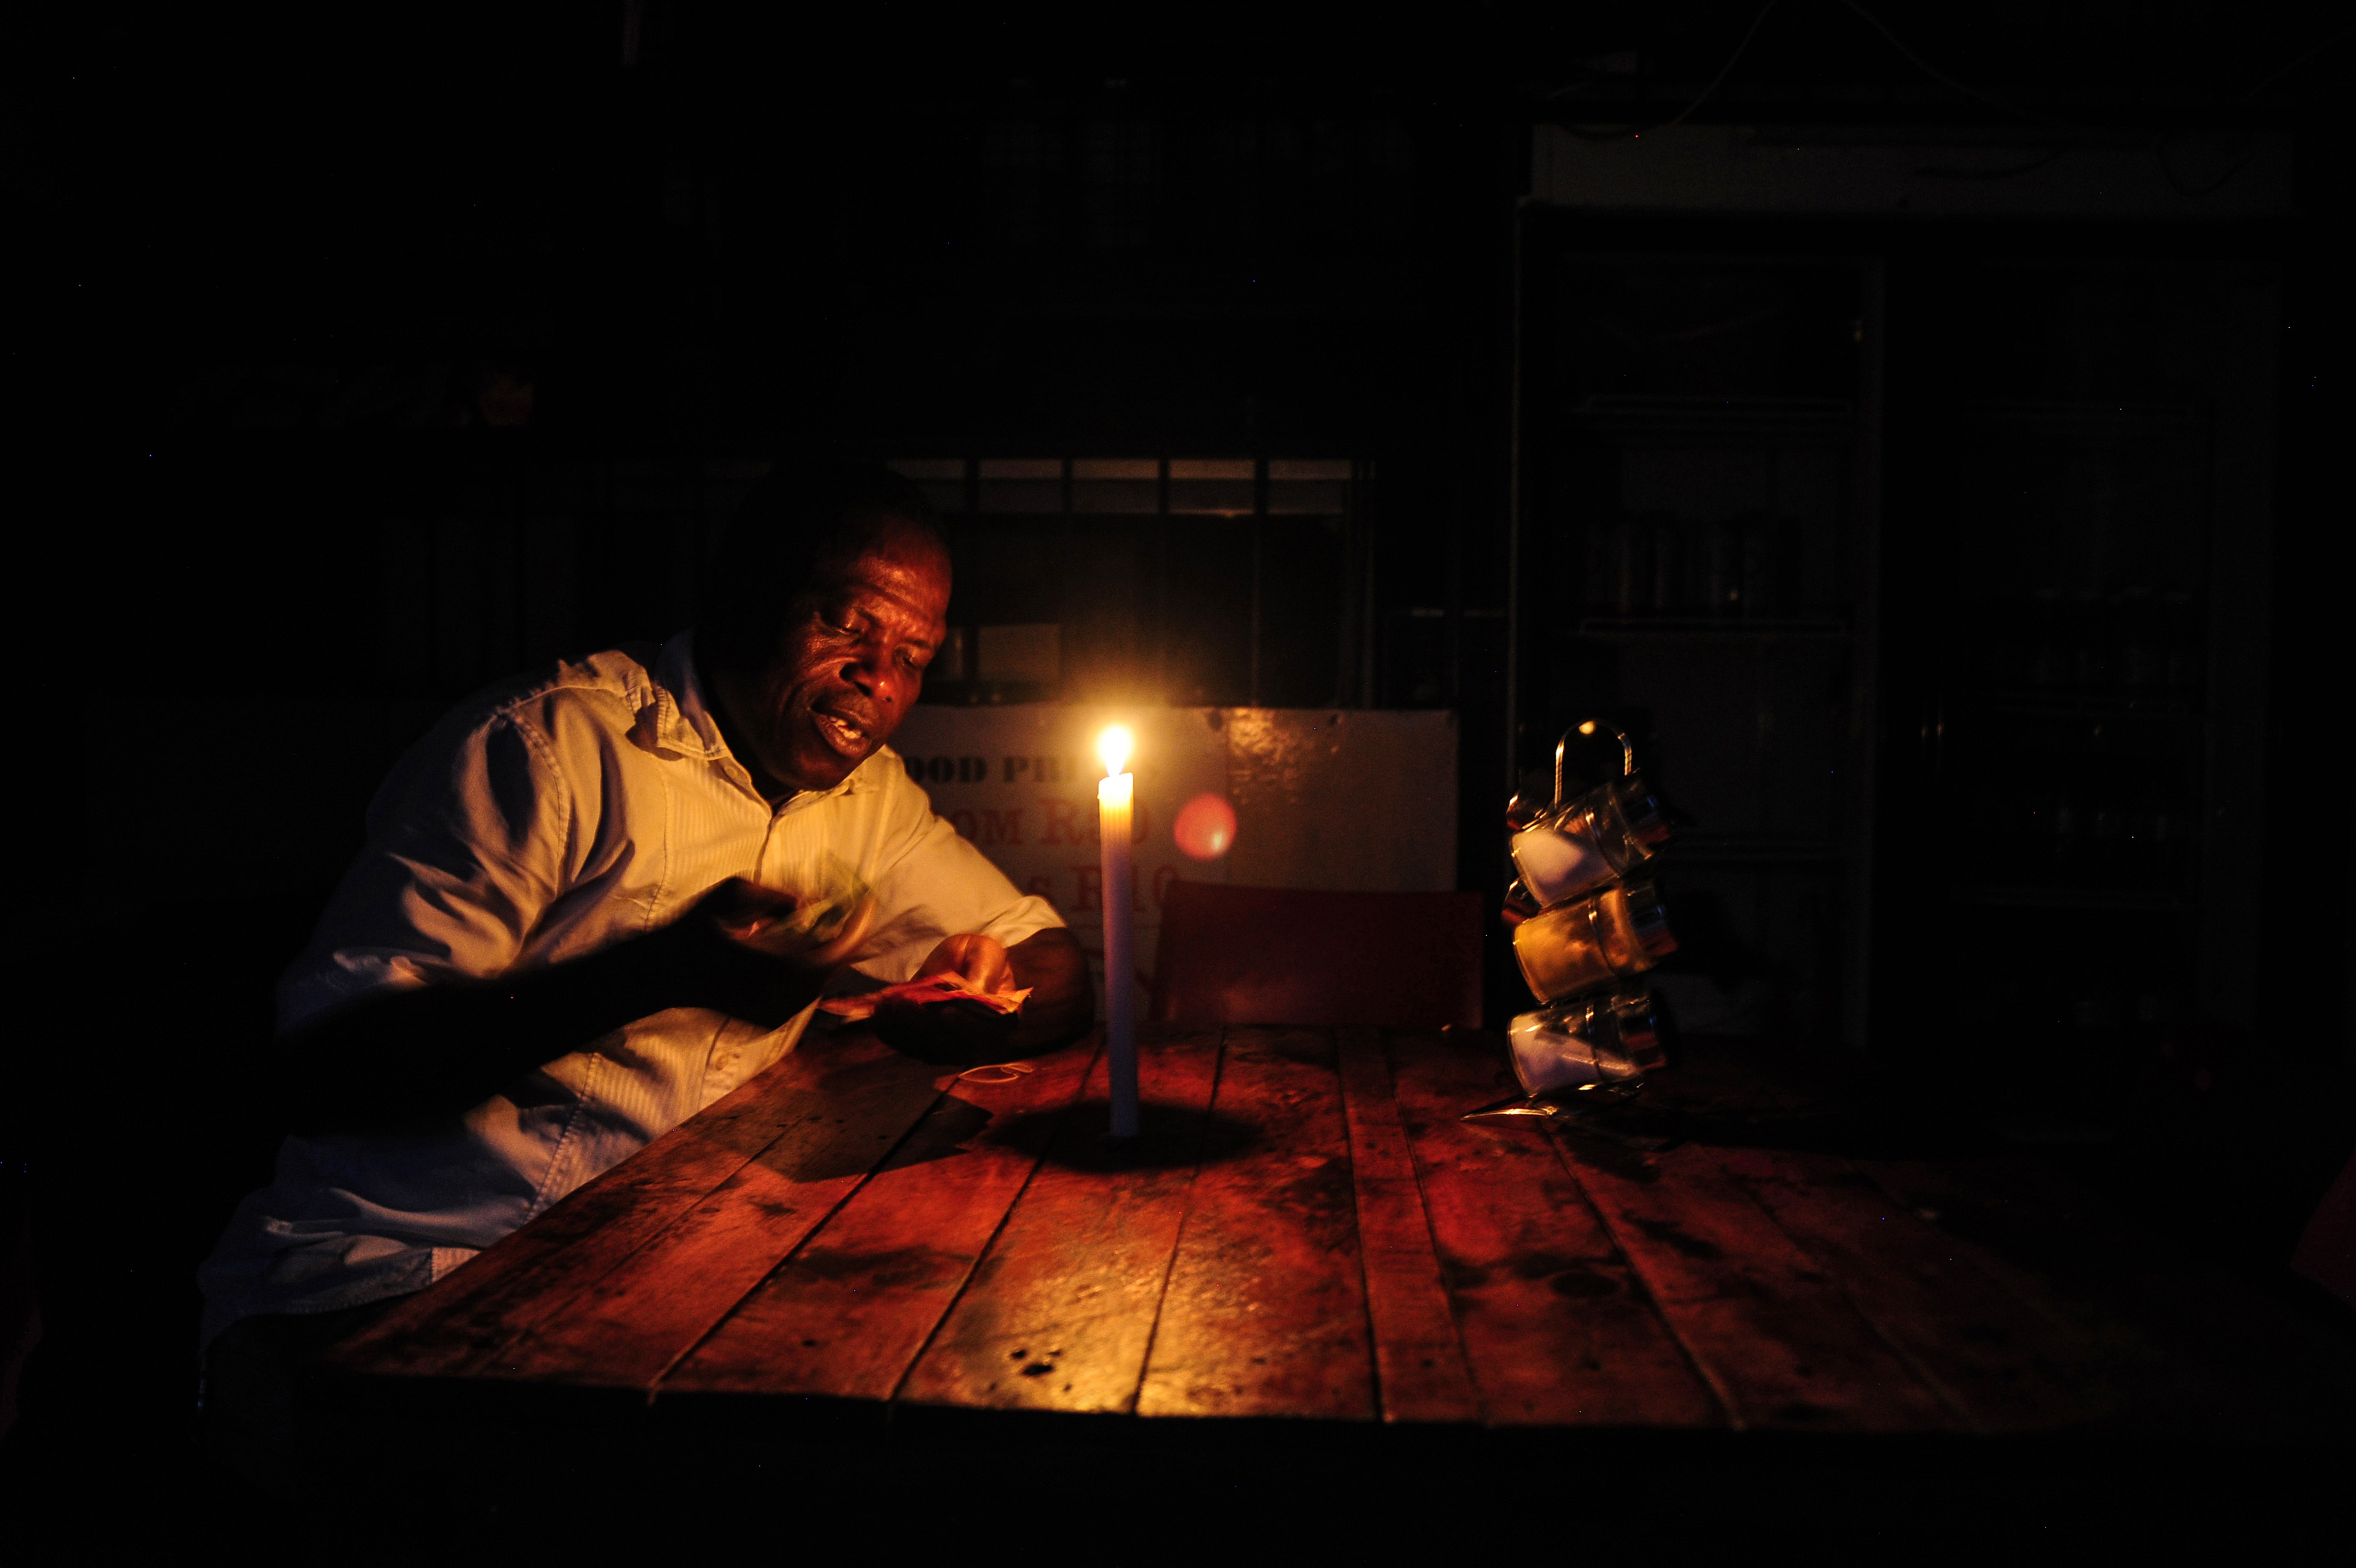 South Africa Power Cuts Today Reveal Climate Politics Gone Wrong - Bloomberg